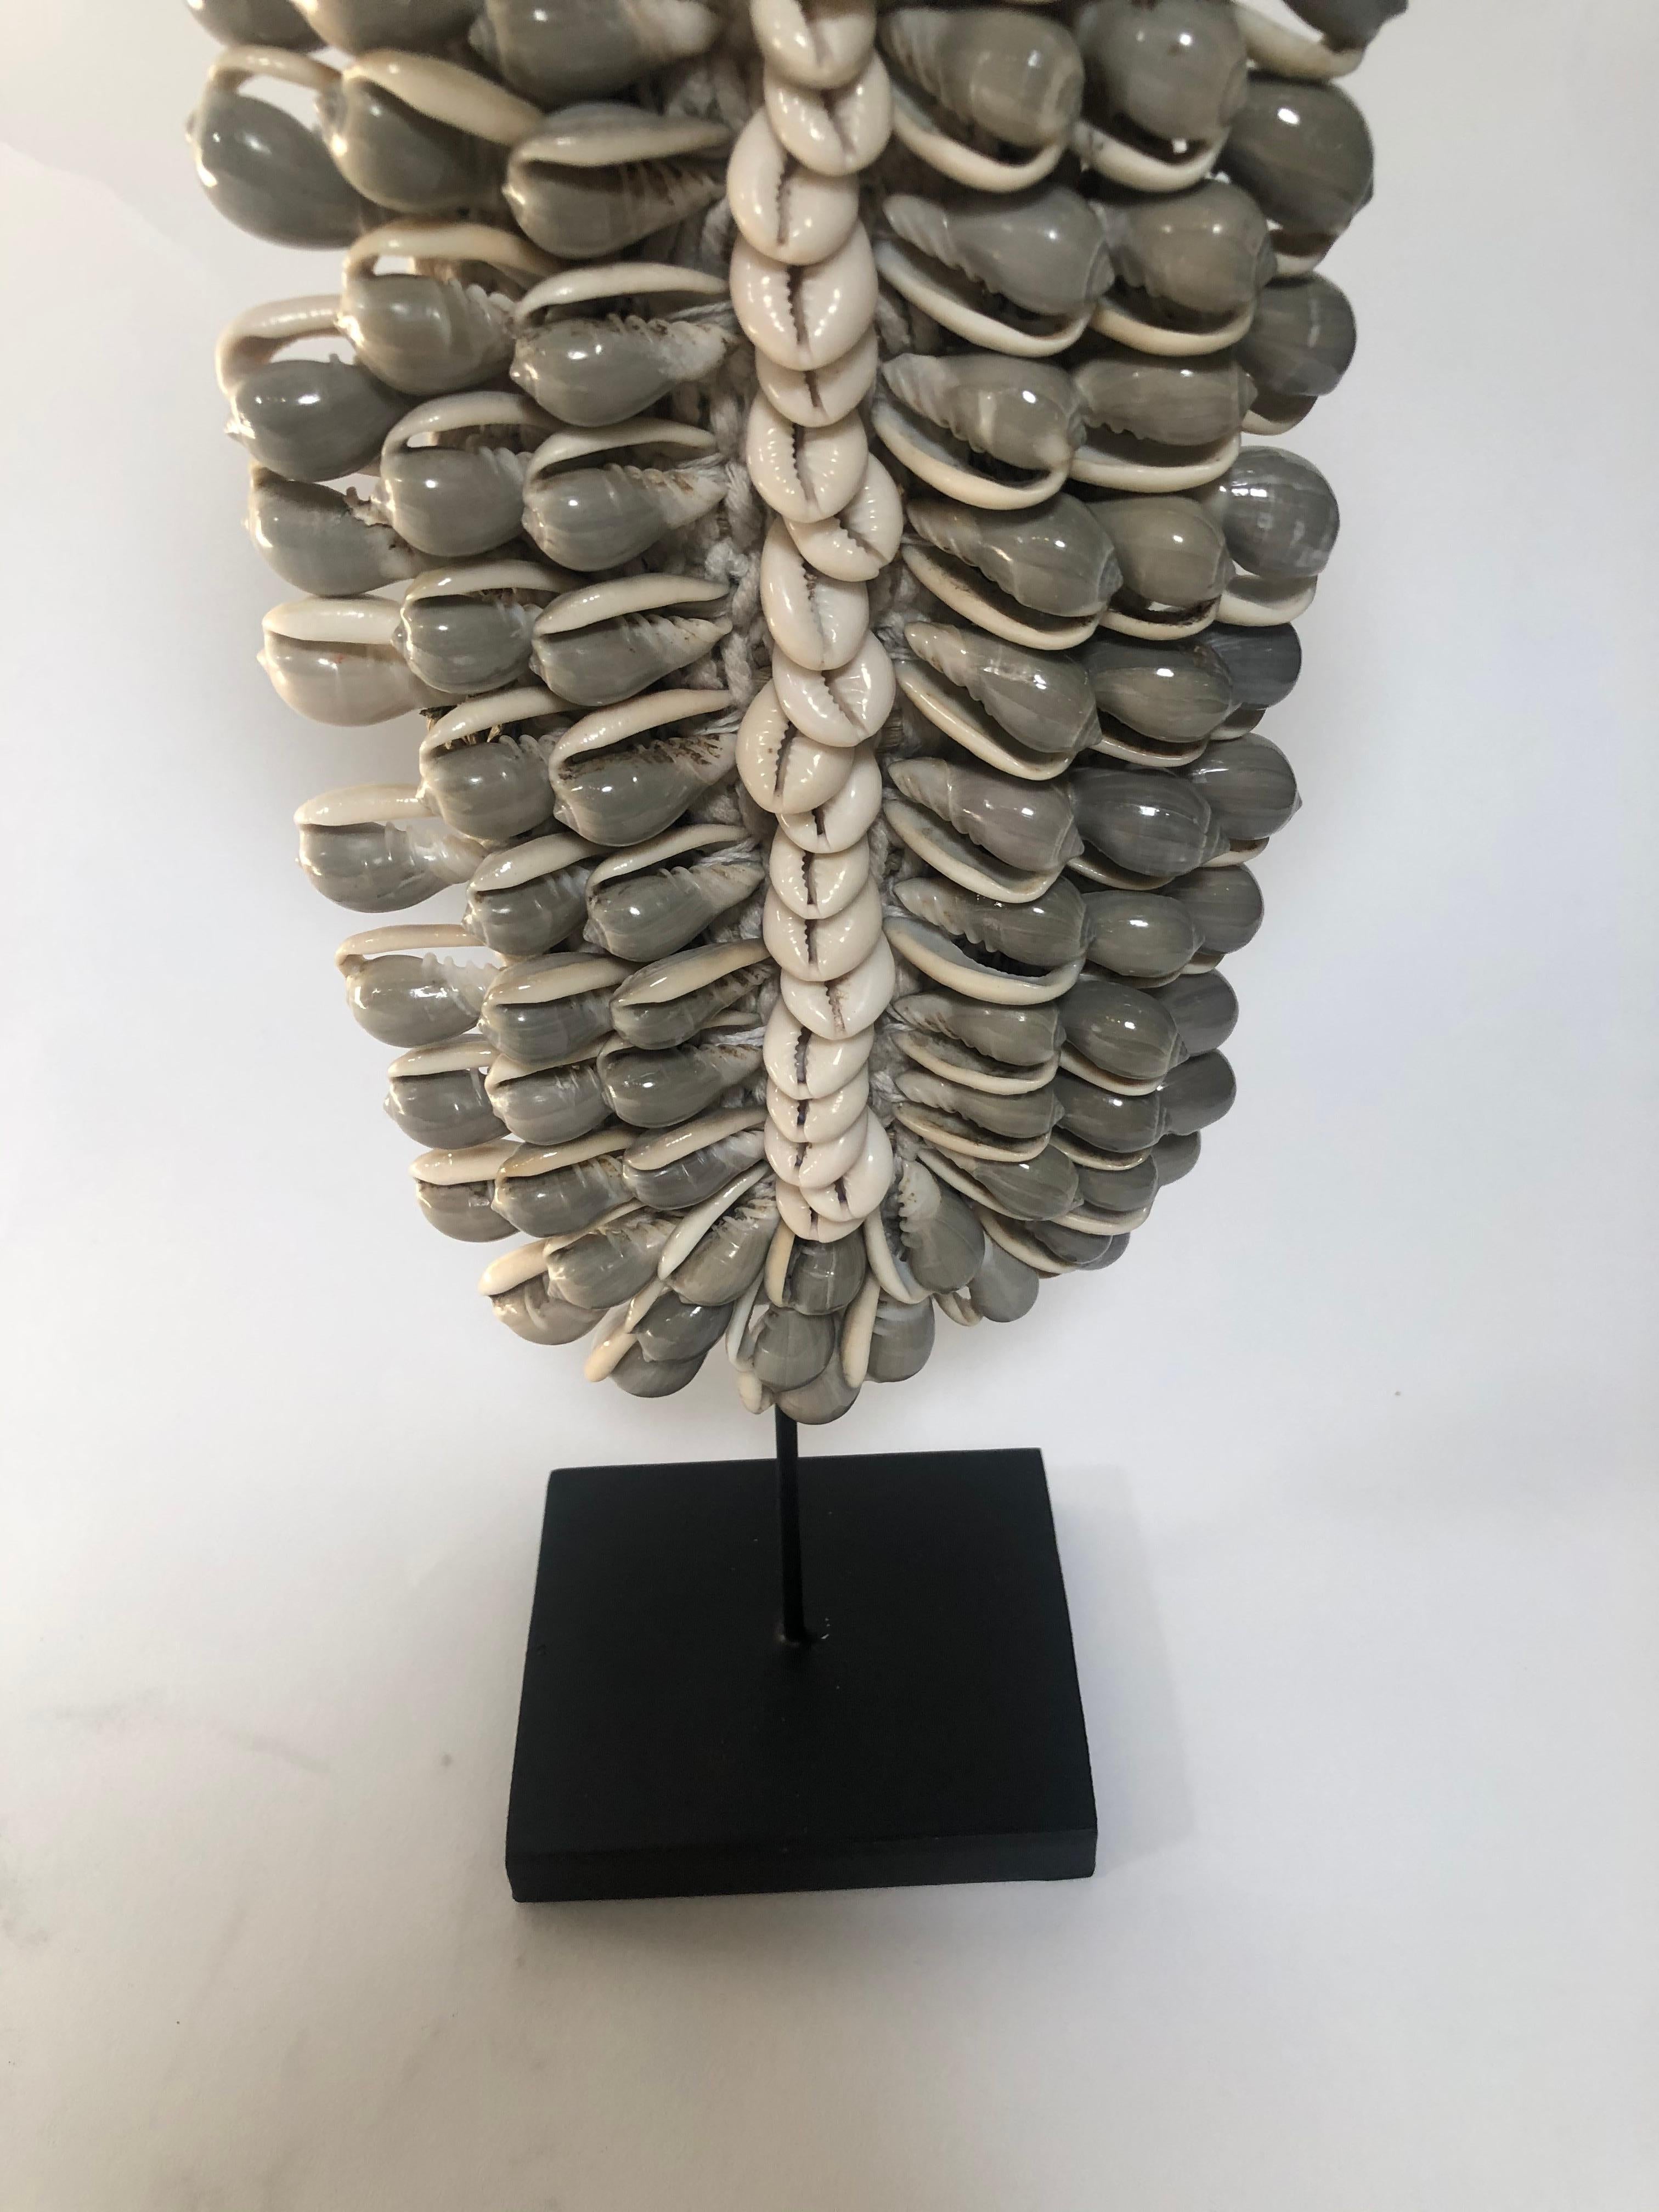 Detailed shell necklace on stand from Asia.